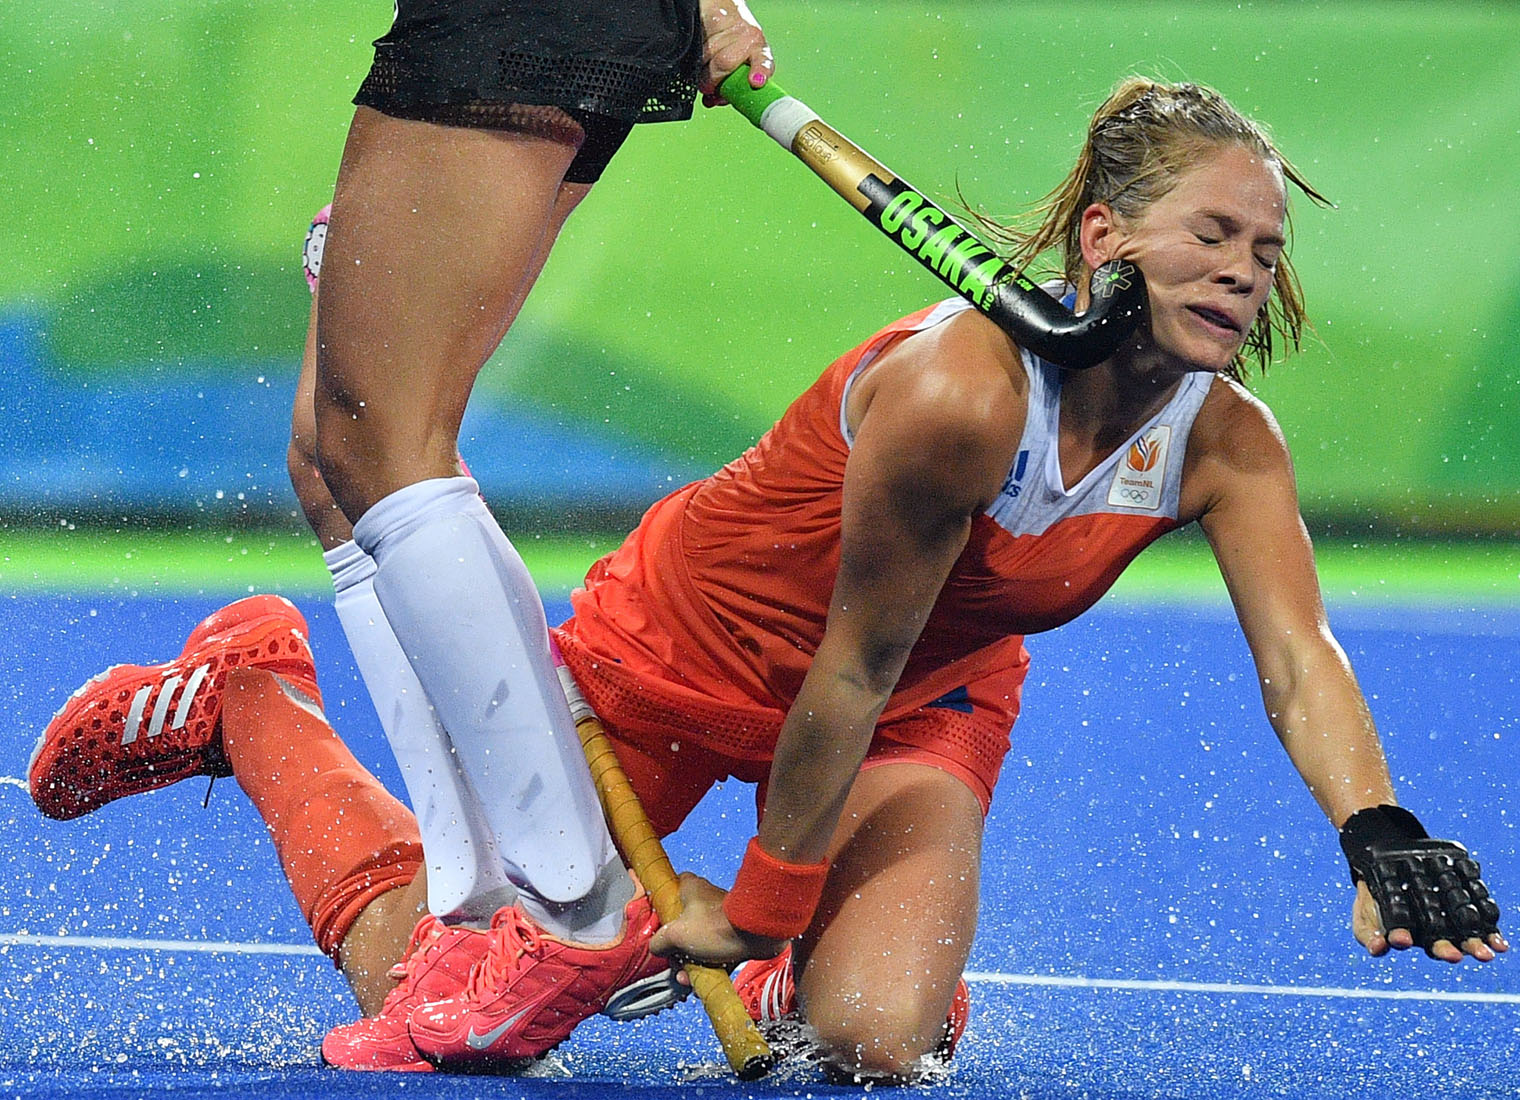 TOPSHOT - Netherlands' Kitty van Male (R) is hit on the face by Argentina's Agustina Habif during the women's quarterfinal field hockey Netherland vs Argentina match of the Rio 2016 Olympics Games at the Olympic Hockey Centre in Rio de Janeiro on August 15, 2016. / AFP / Carl DE SOUZA (Photo credit should read CARL DE SOUZA/AFP/Getty Images)